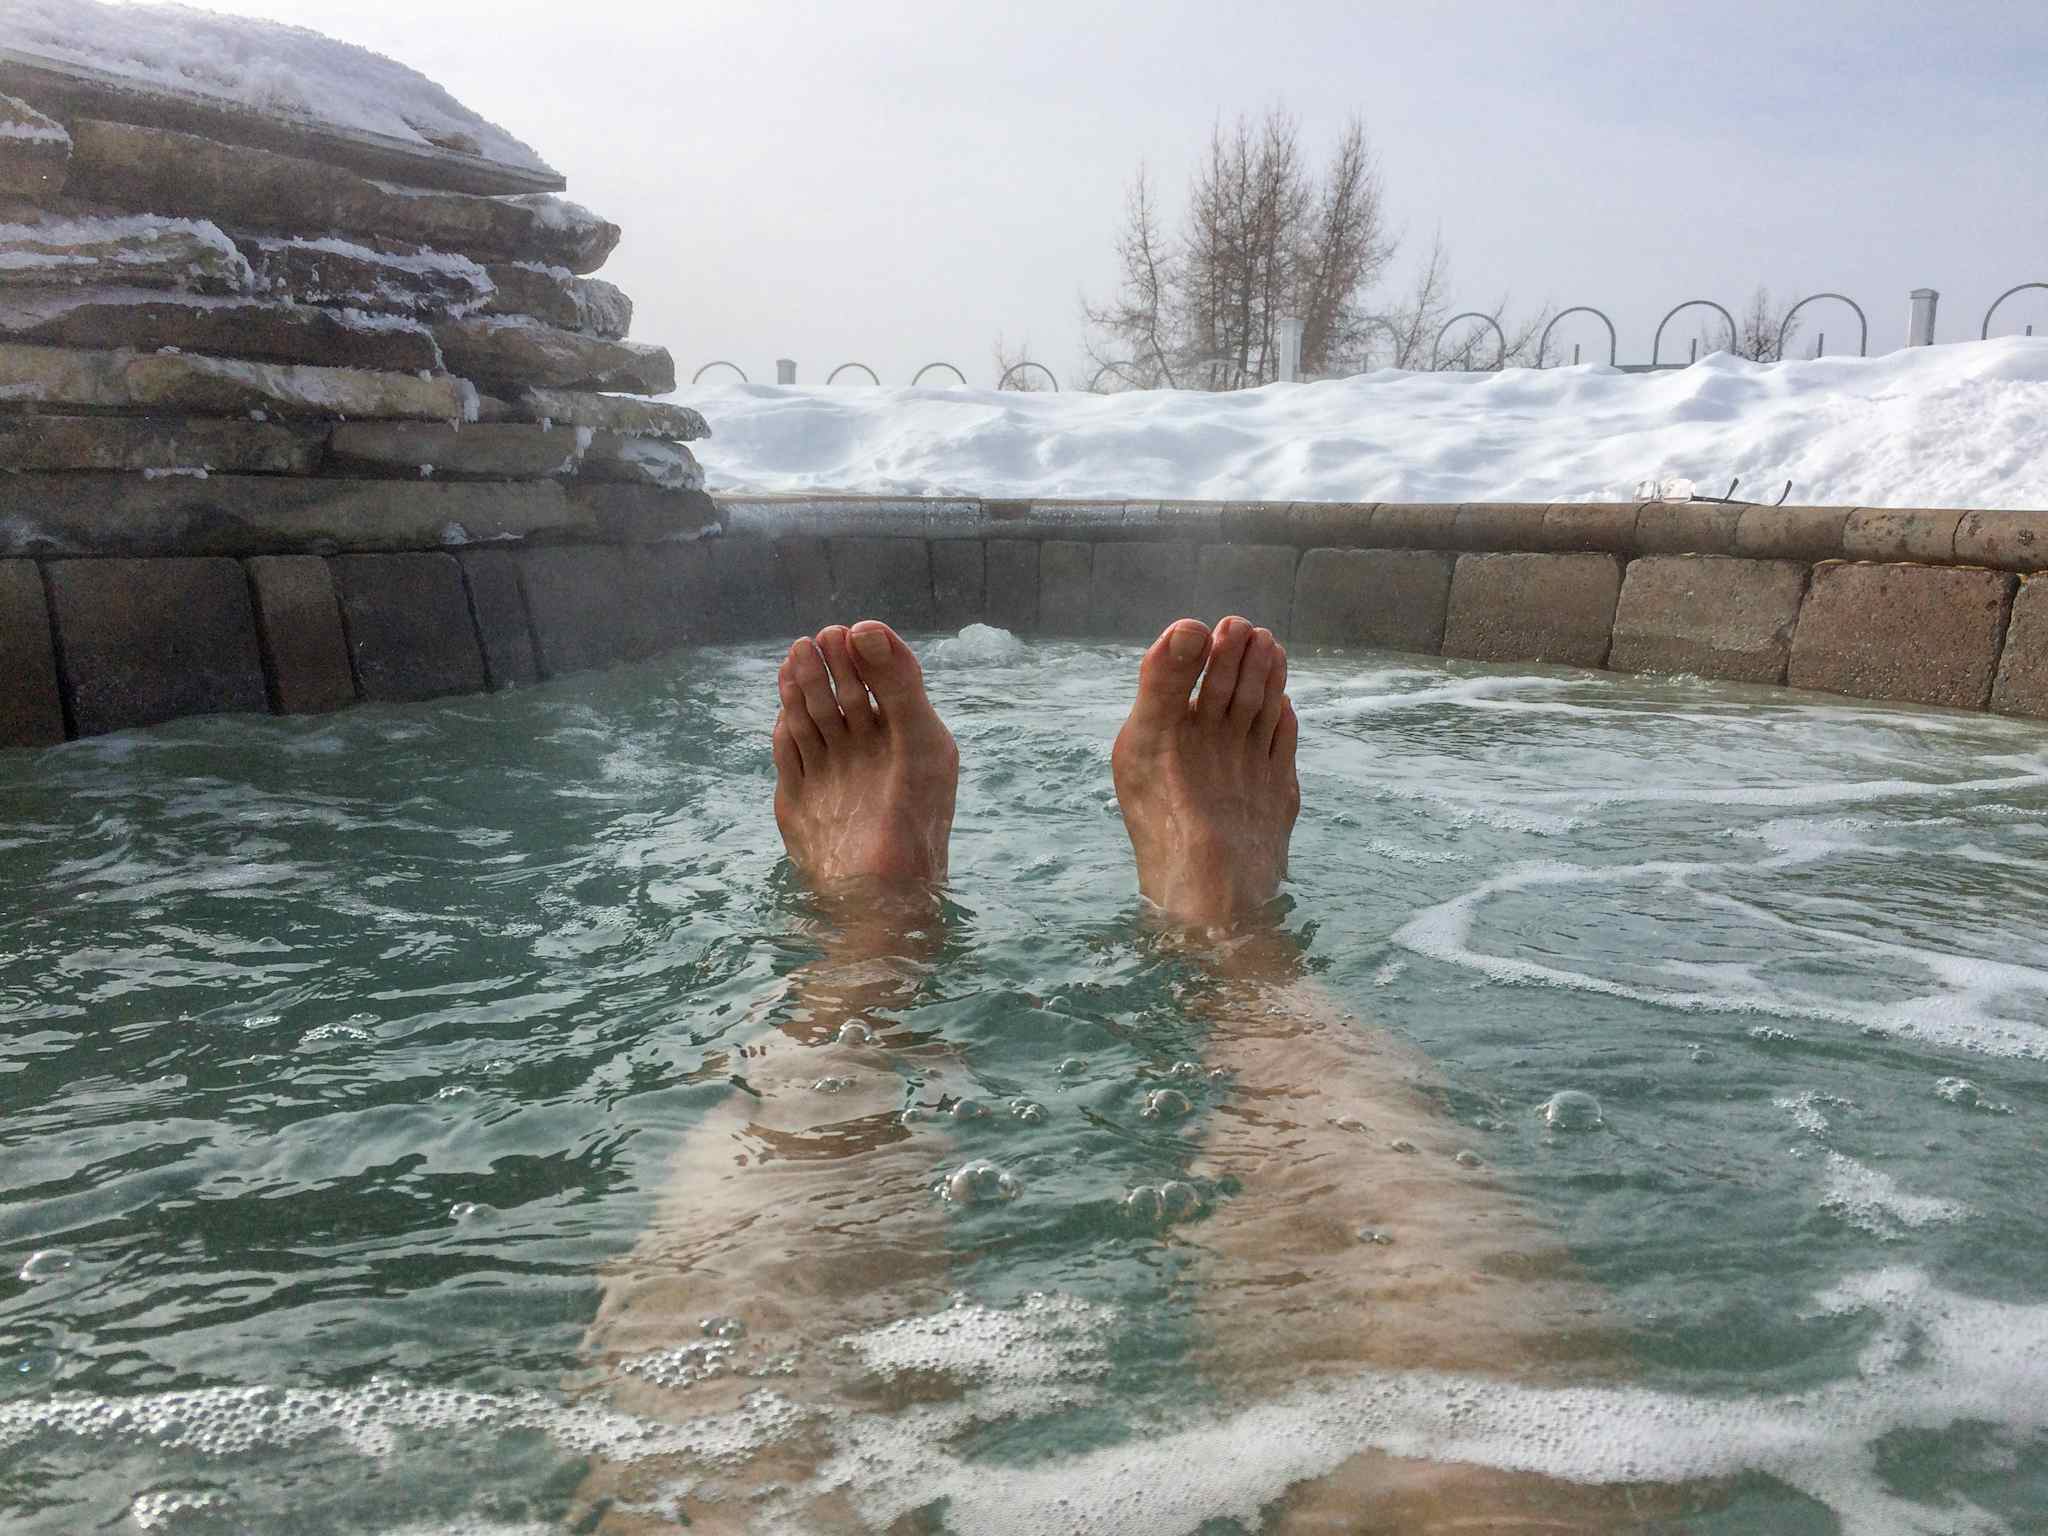 Man lying in hot springs with snow on the edge